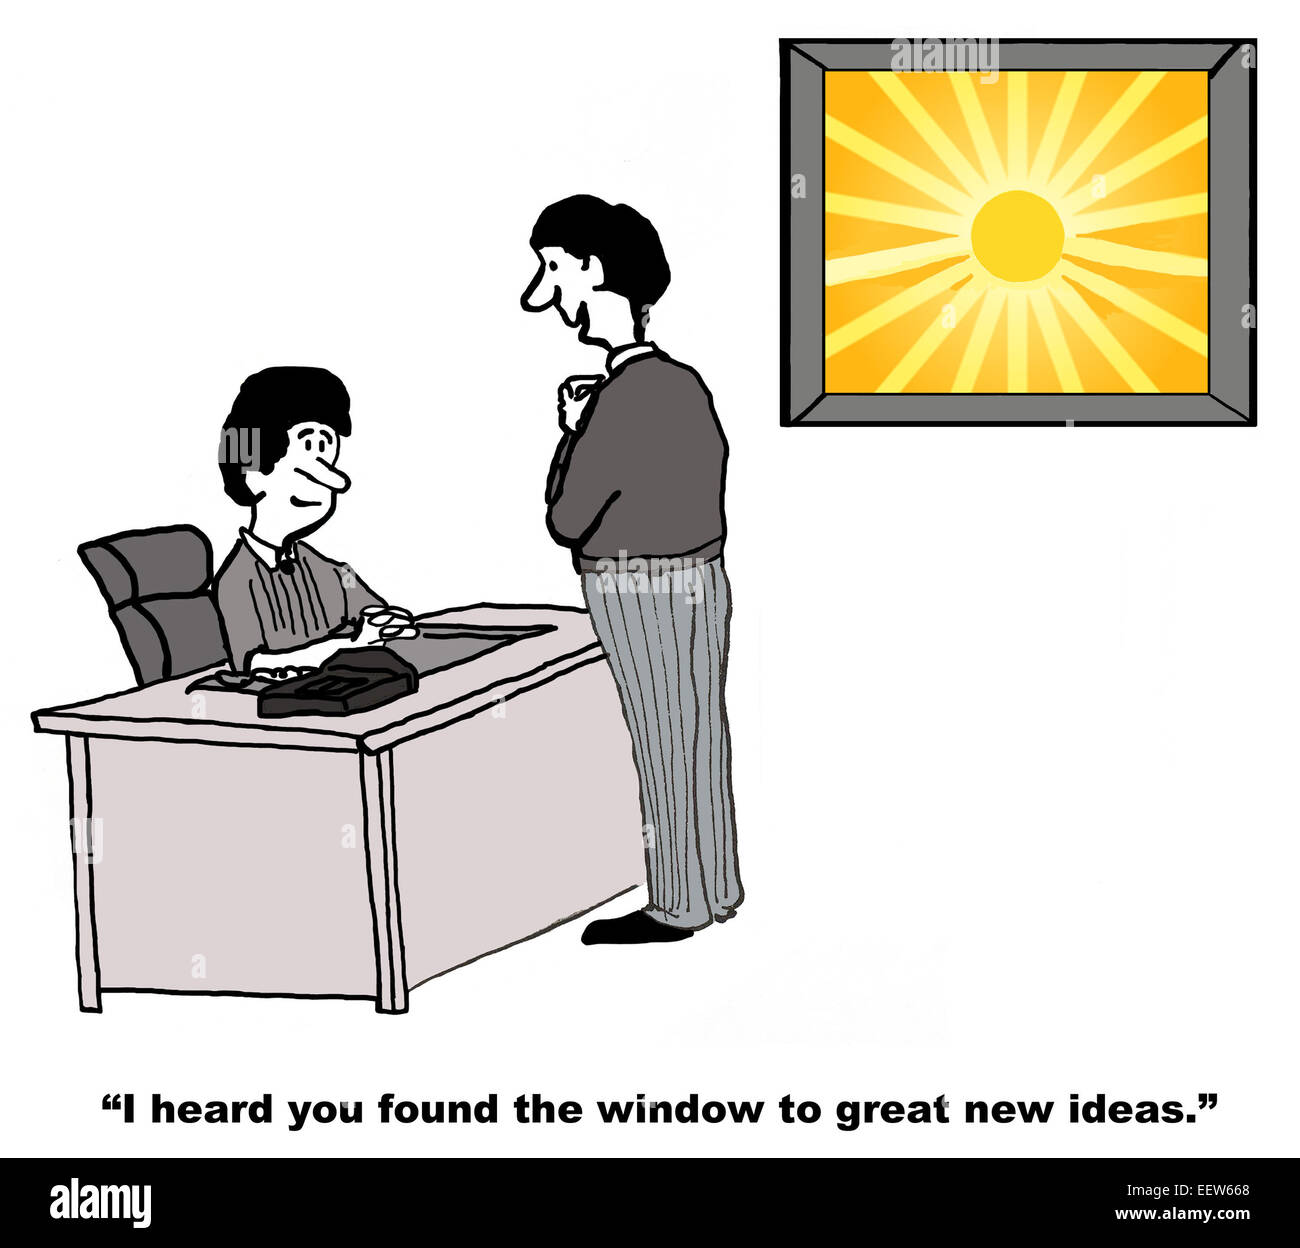 Cartoon of businessman saying to coworker he heard she found the window to great new ideas. Stock Photo